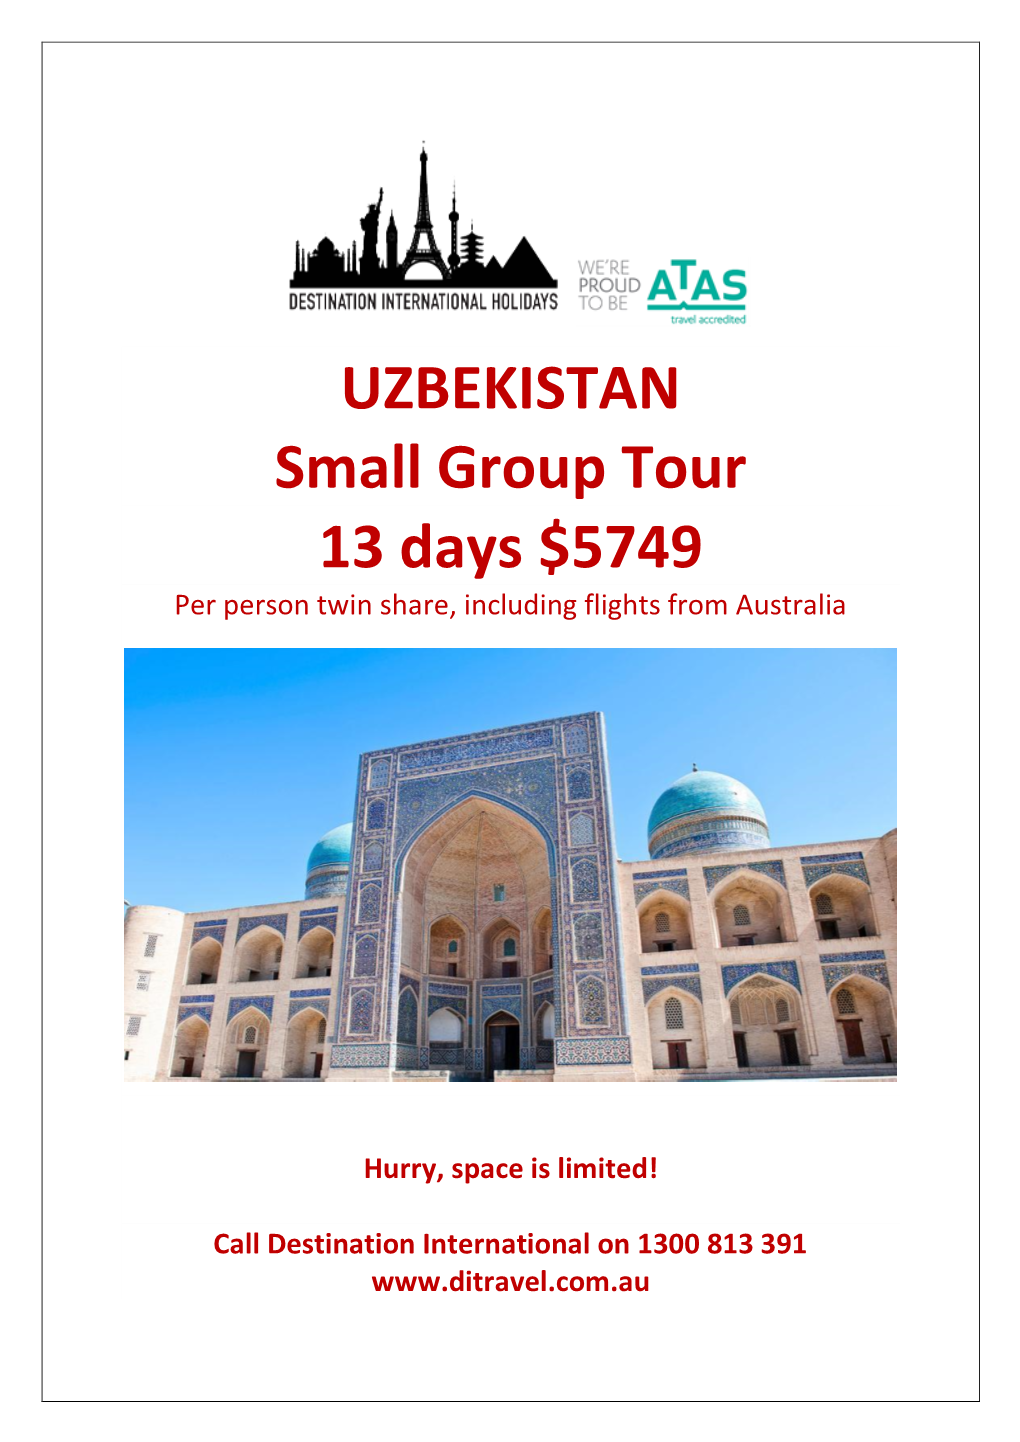 UZBEKISTAN Small Group Tour 13 Days $5749 Per Person Twin Share, Including Flights from Australia